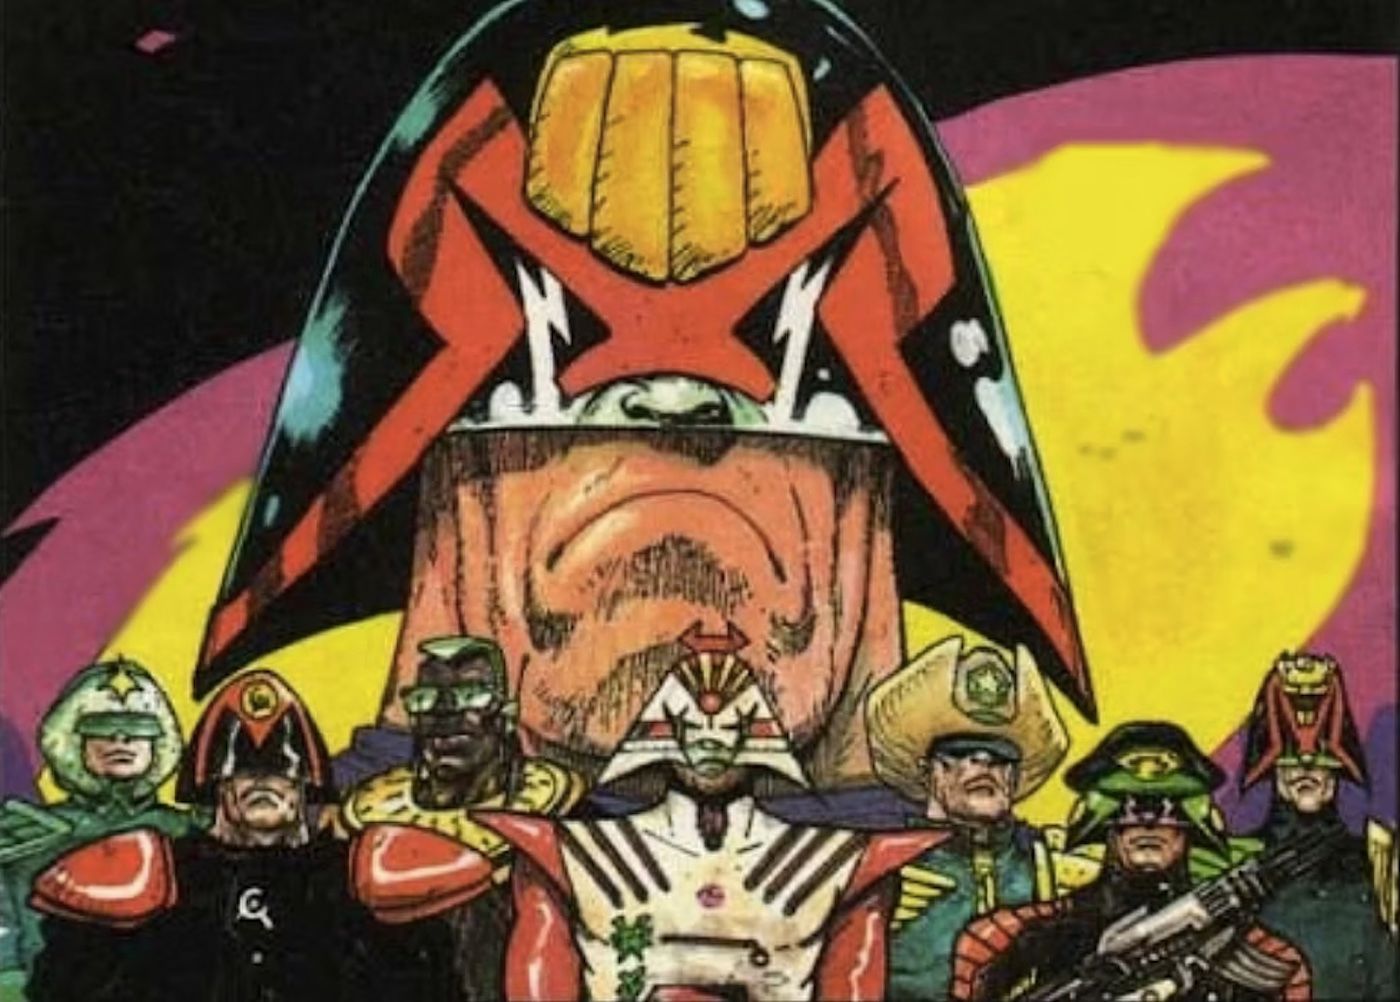 Every Megacity That Exists in Dredd Lore, & Where They Are in the World